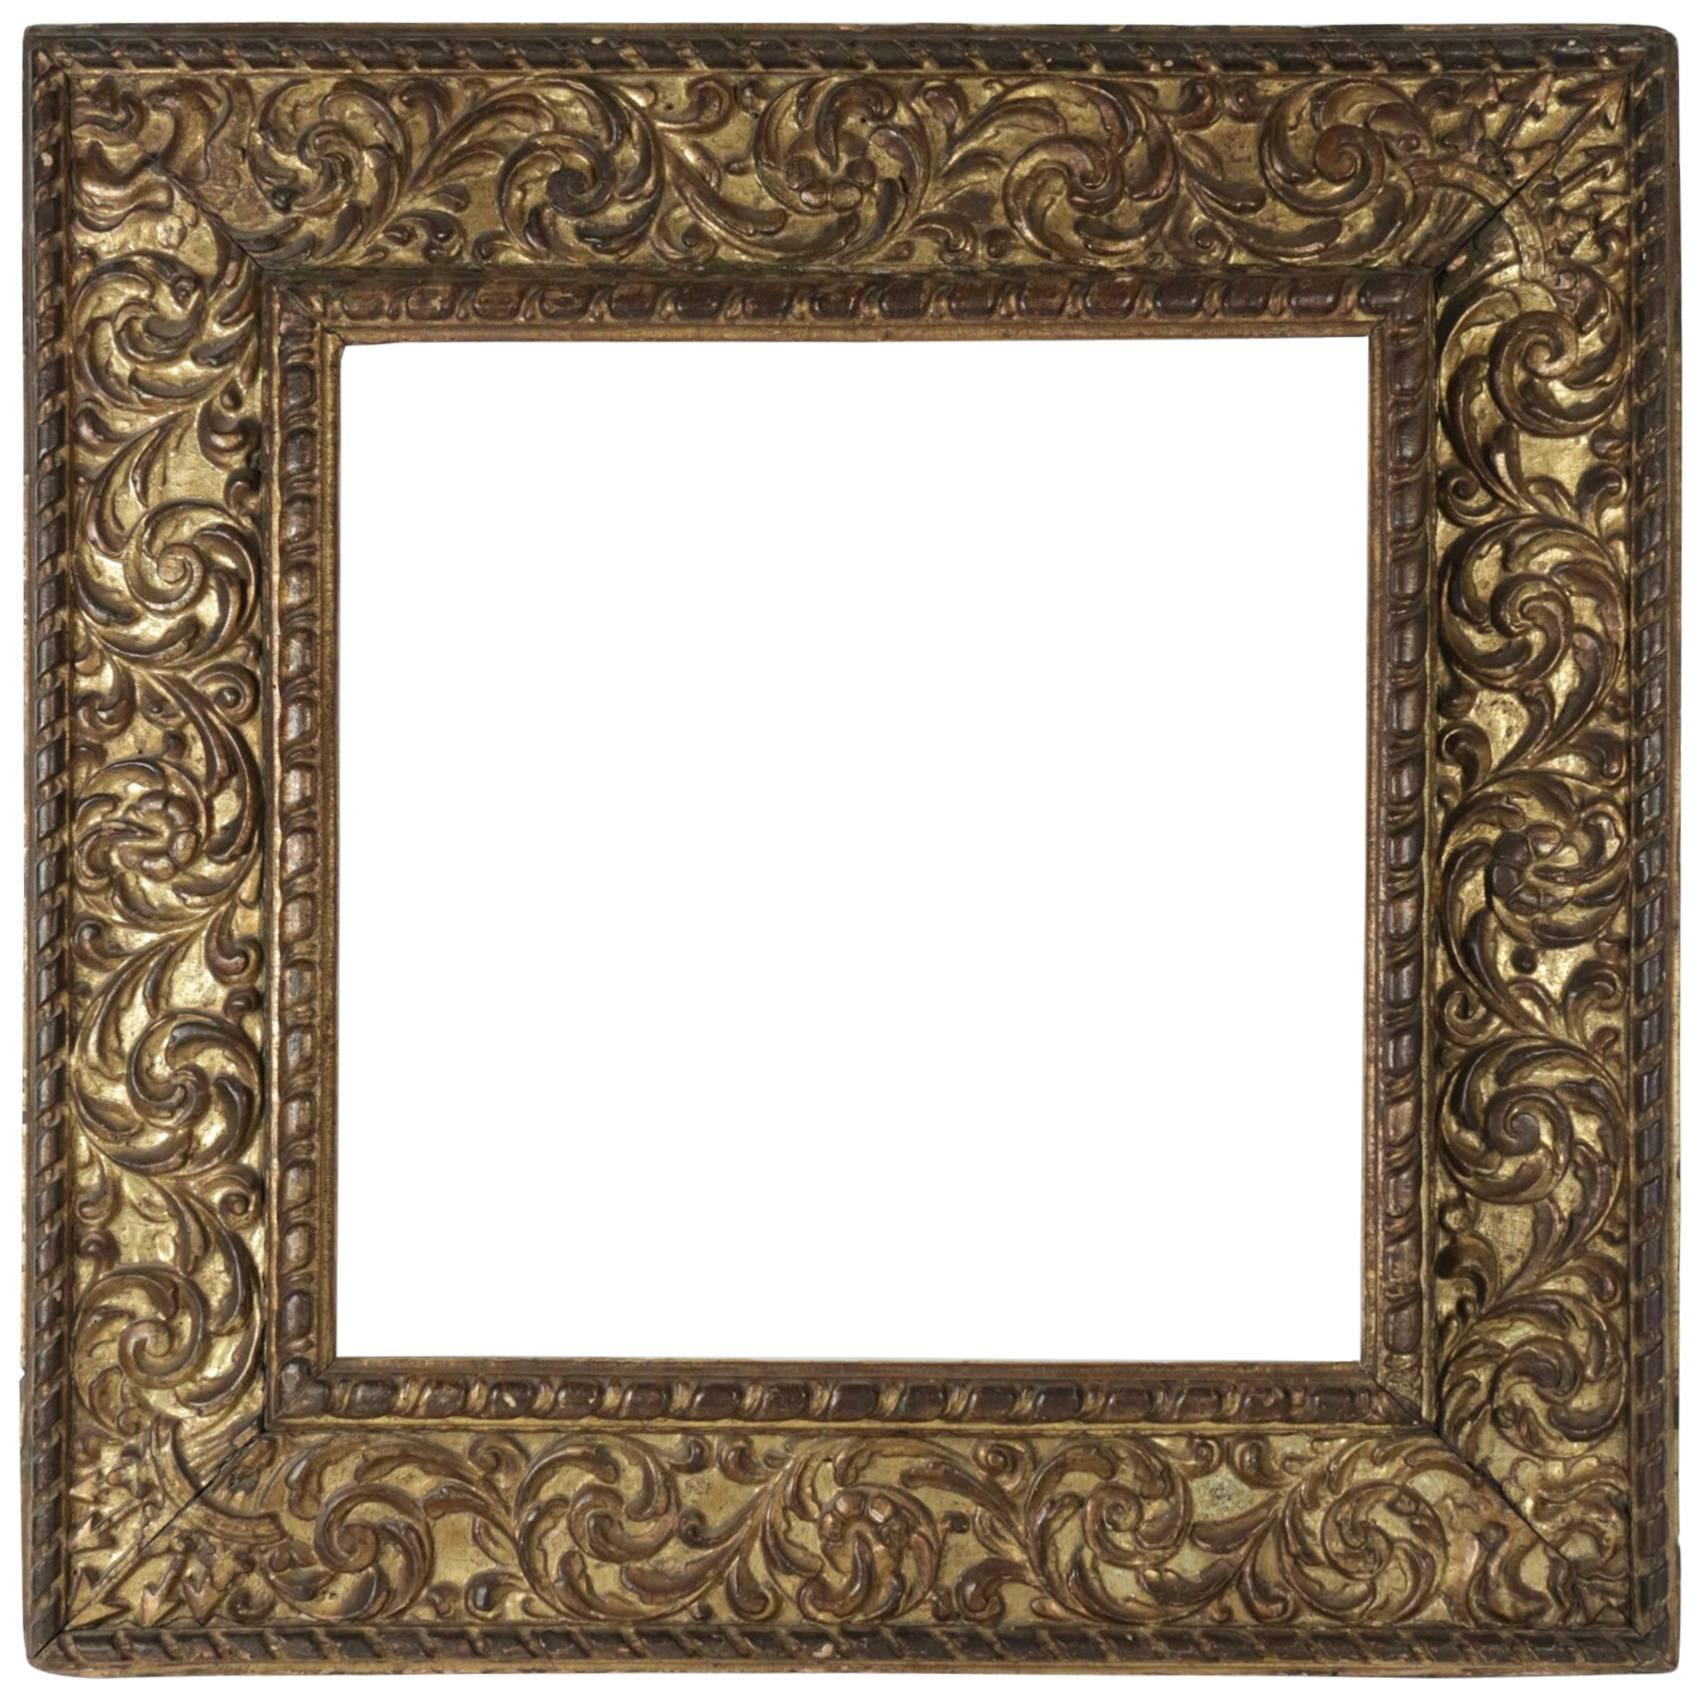 Fabulous Italian Frame Mounted as Mirror, Northern Italy, Late 16th Century For Sale